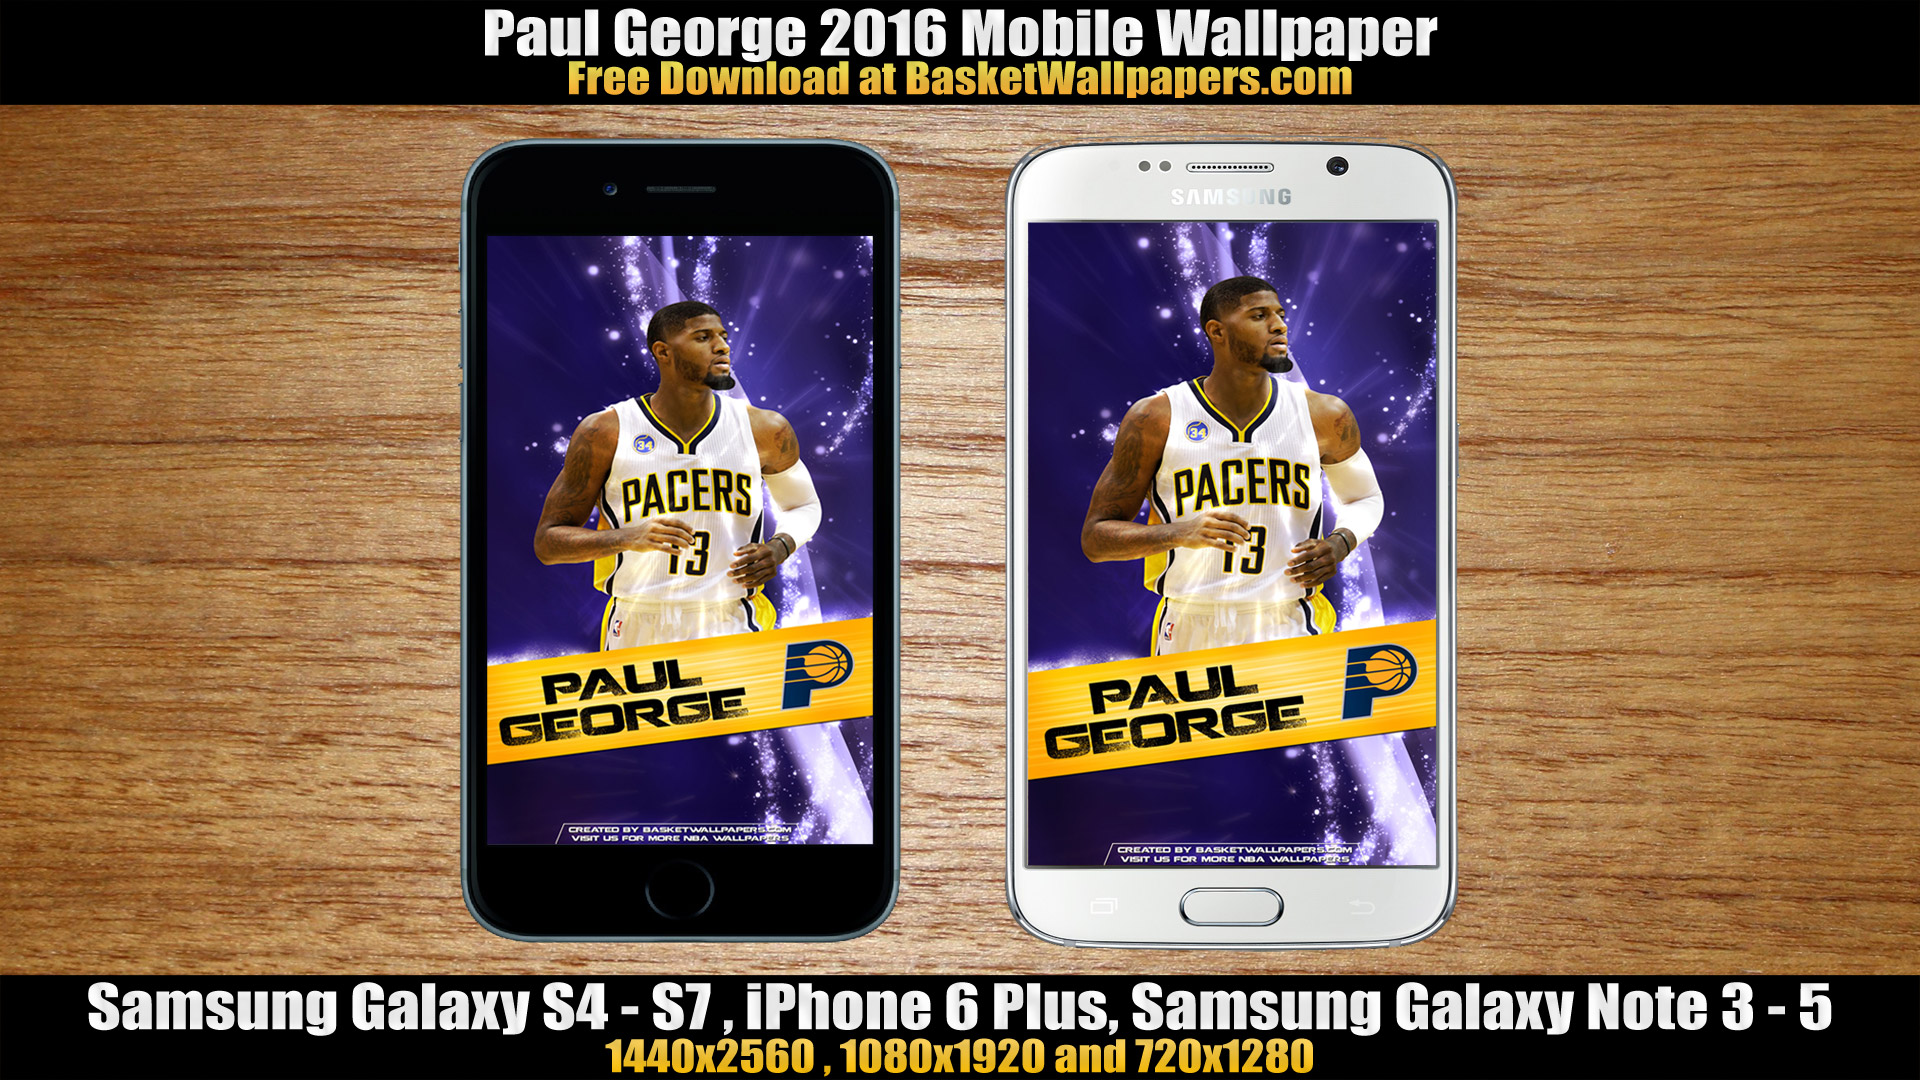 Paul George Indiana Pacers 2016 Mobile Wallpaper Basketball 1920x1080